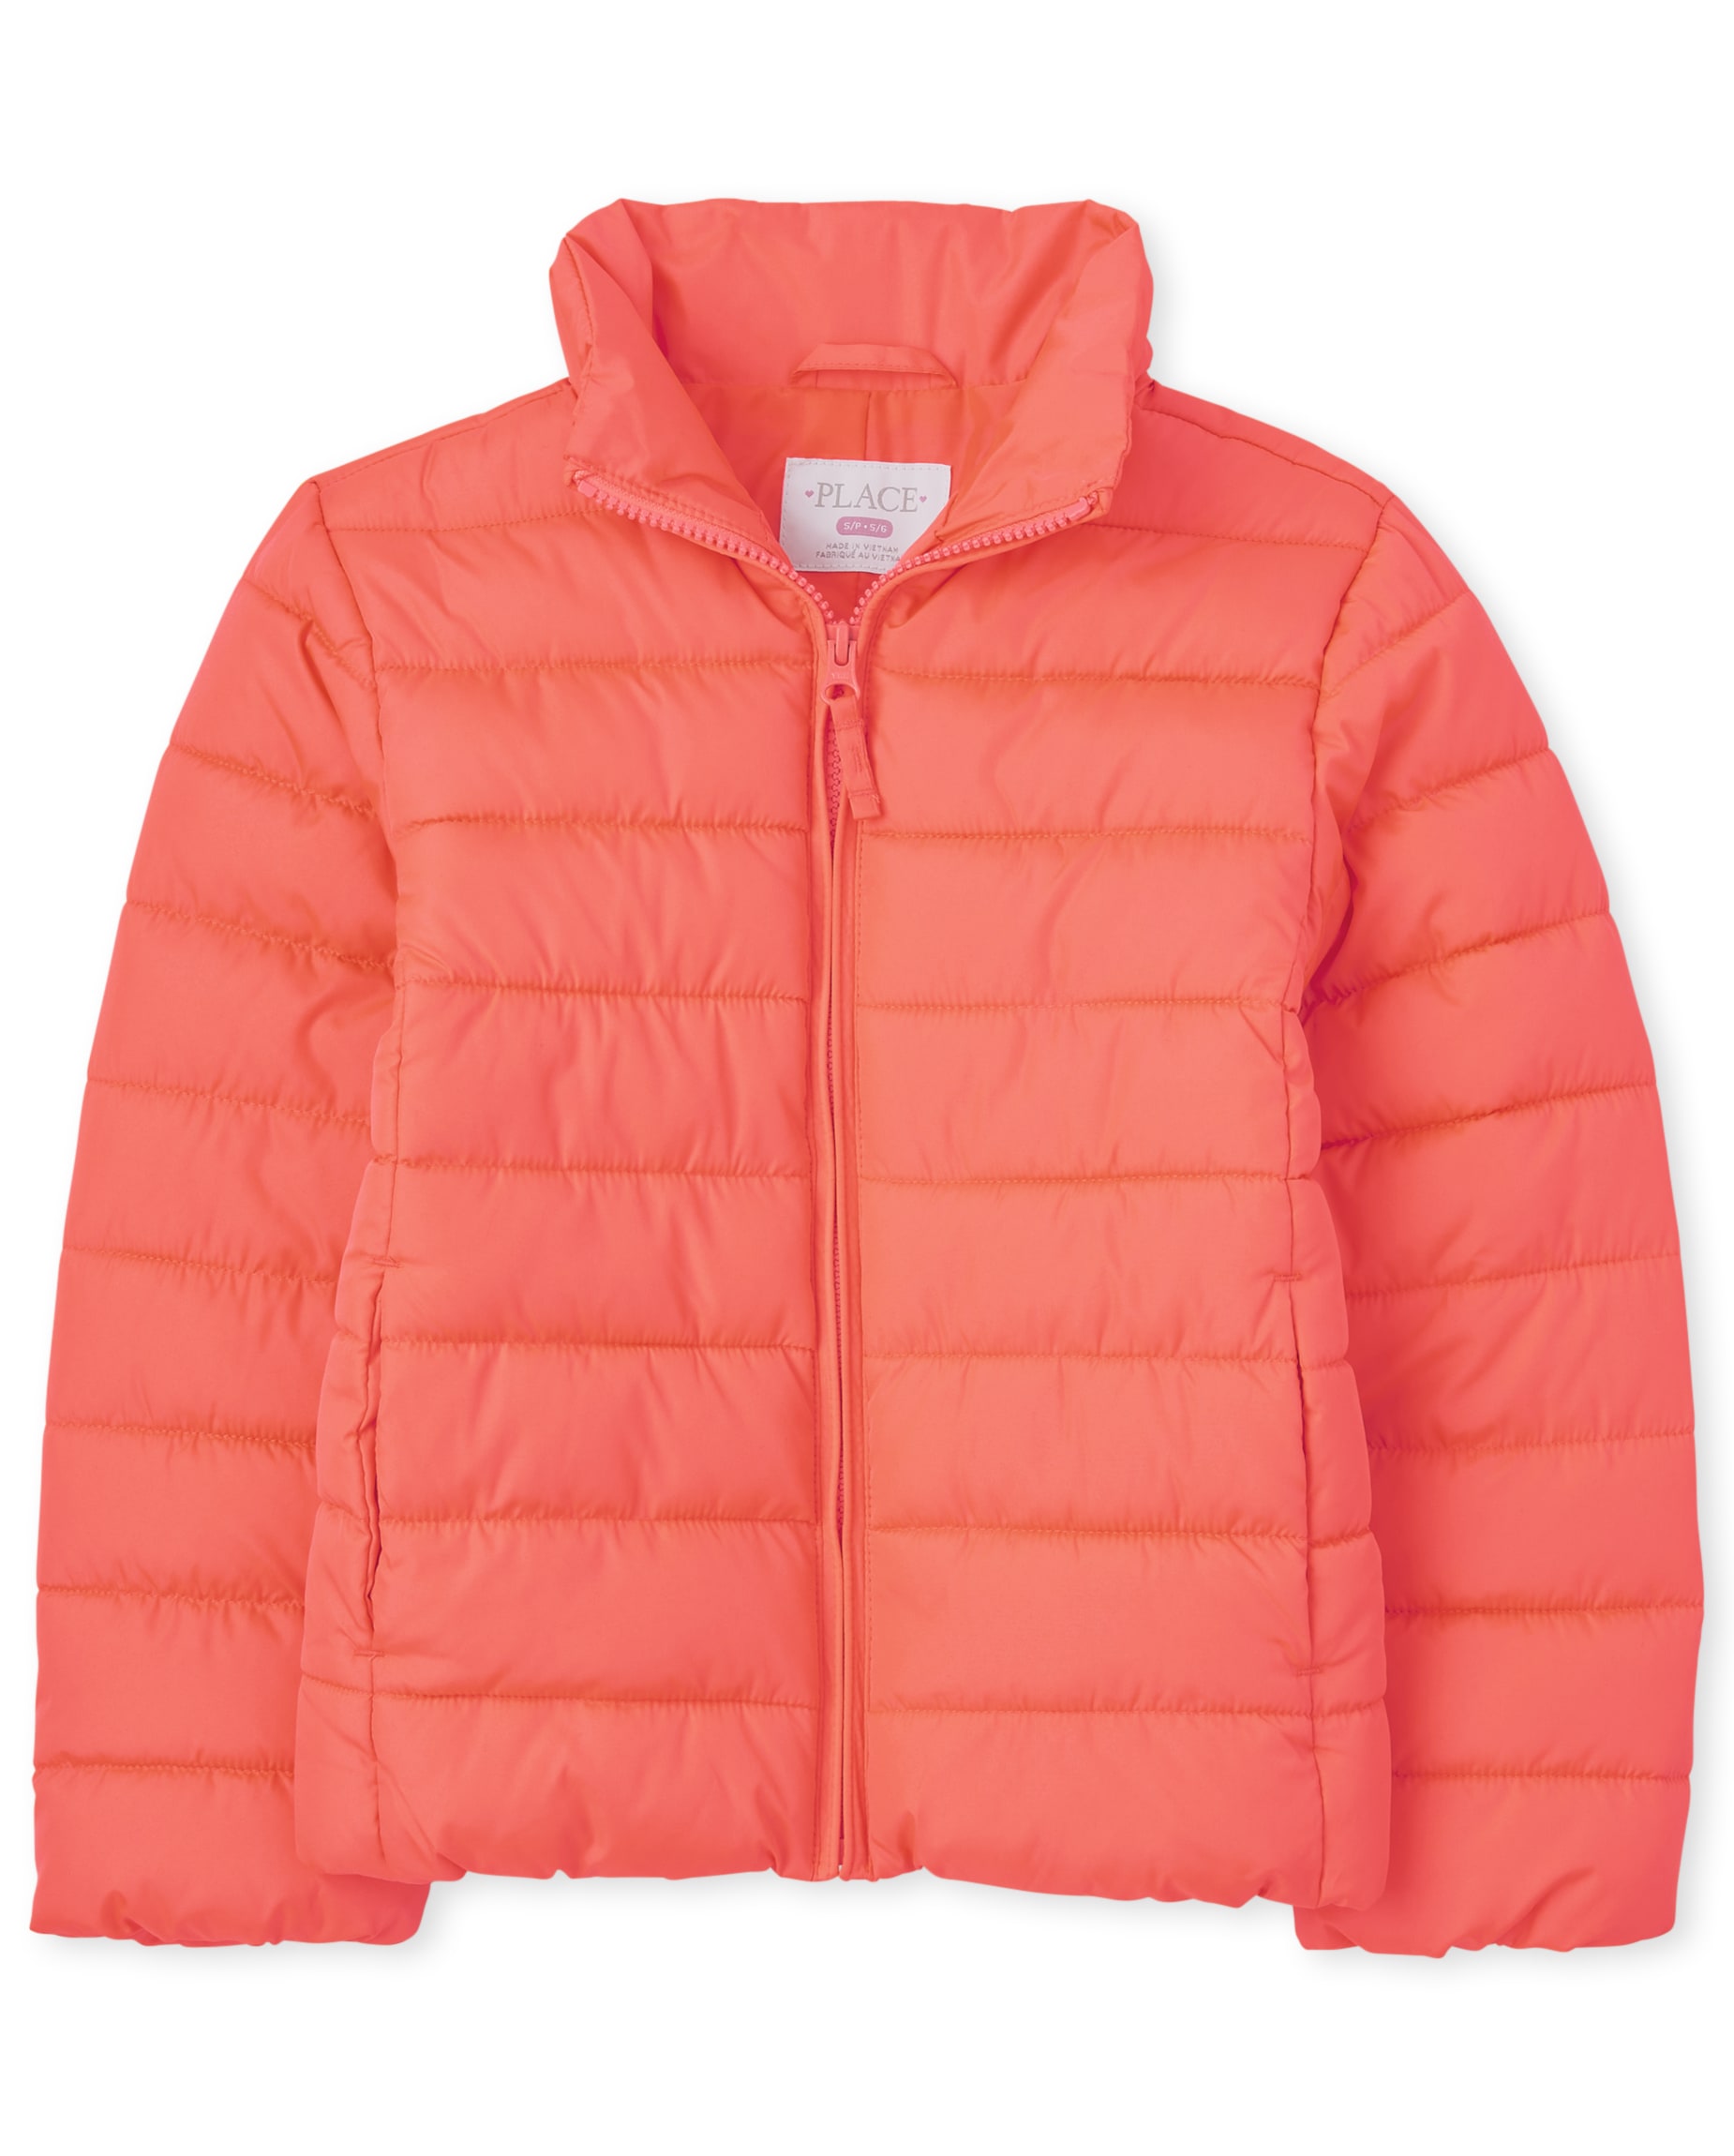 Kids’ Puffer Jackets on sale for $19.99